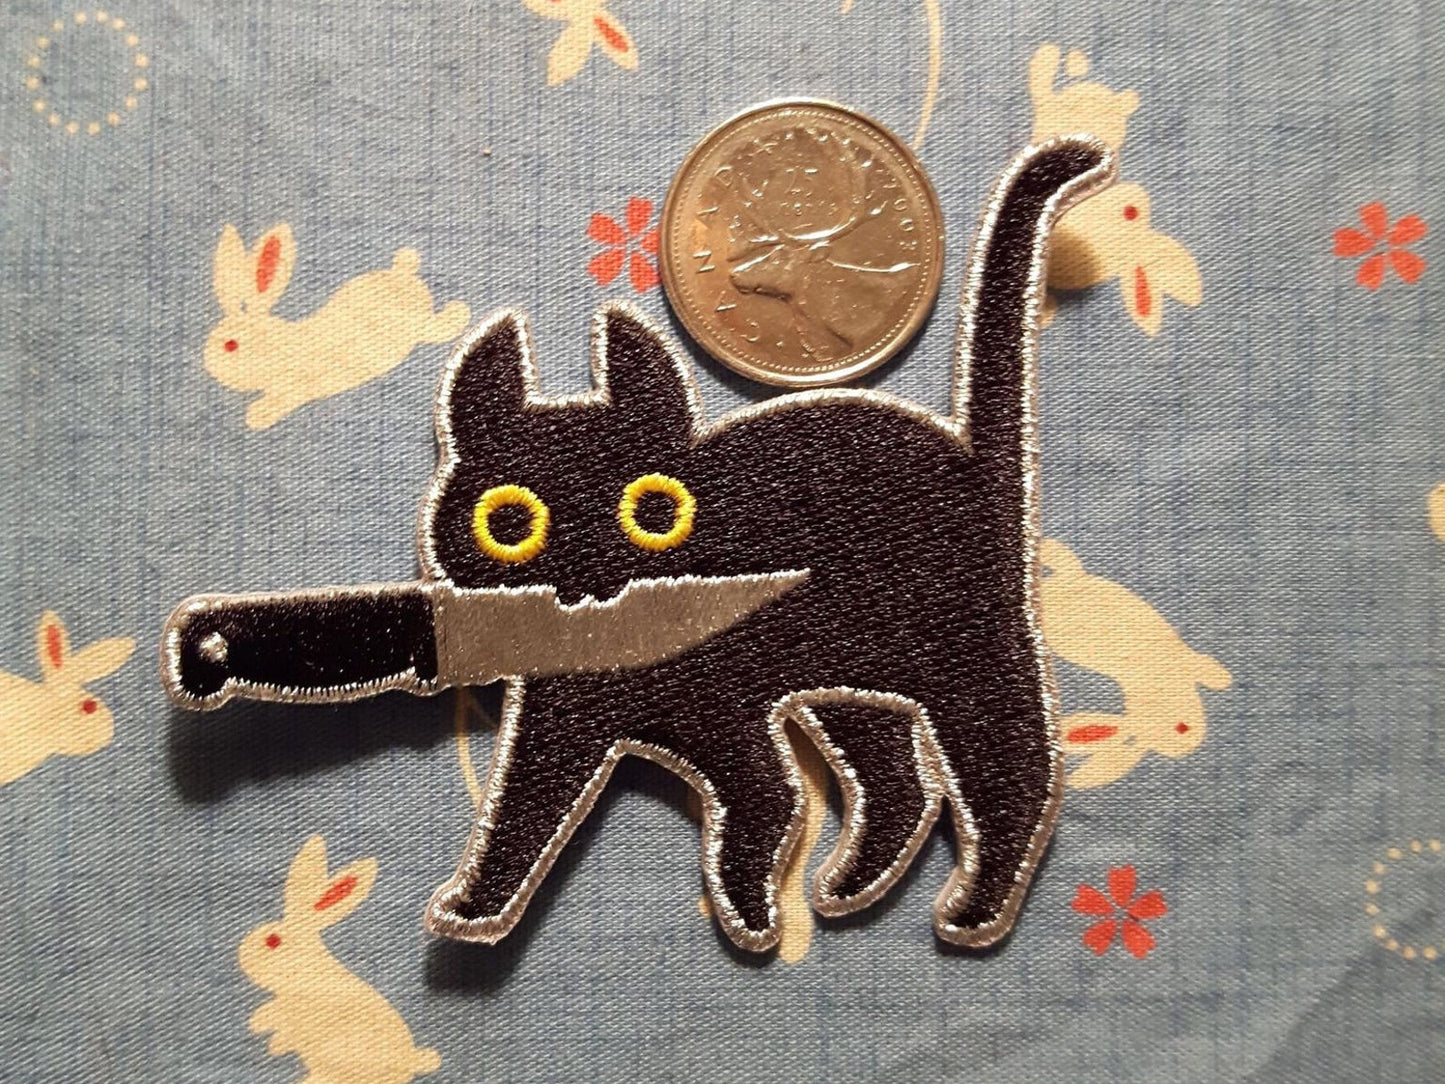 Embroidered patch depicting a black cat with yellow eyes holding knife in mouth on light blue and white rabbit patterned cloth. Canadian quarter for scale..